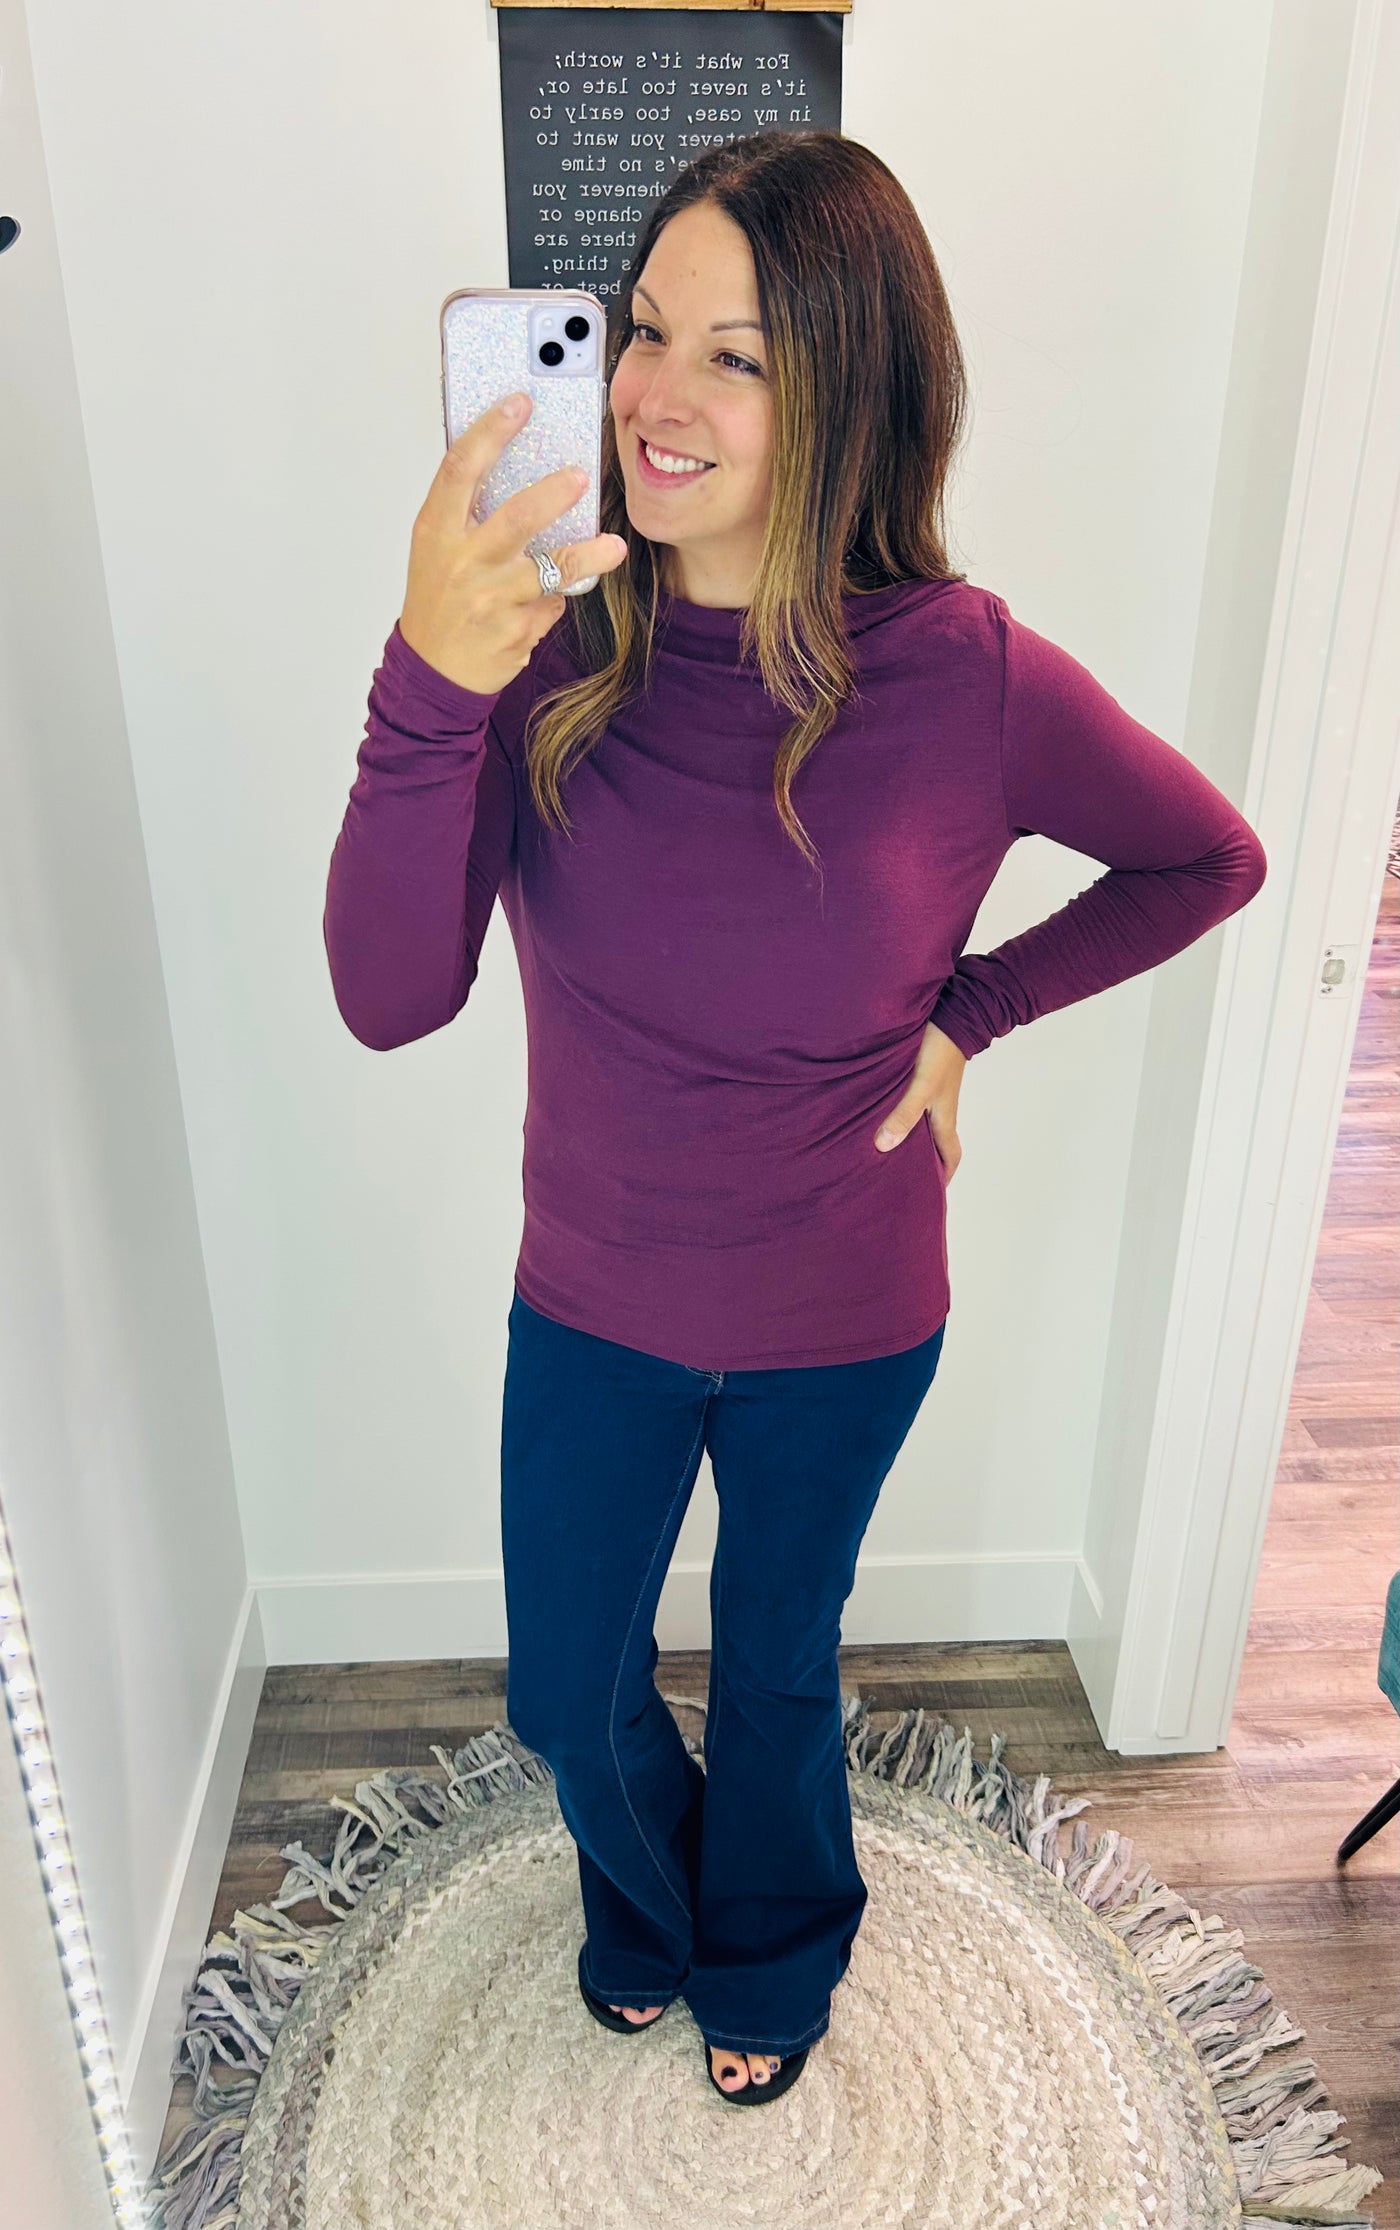 Boat Neck Long Sleeve Top